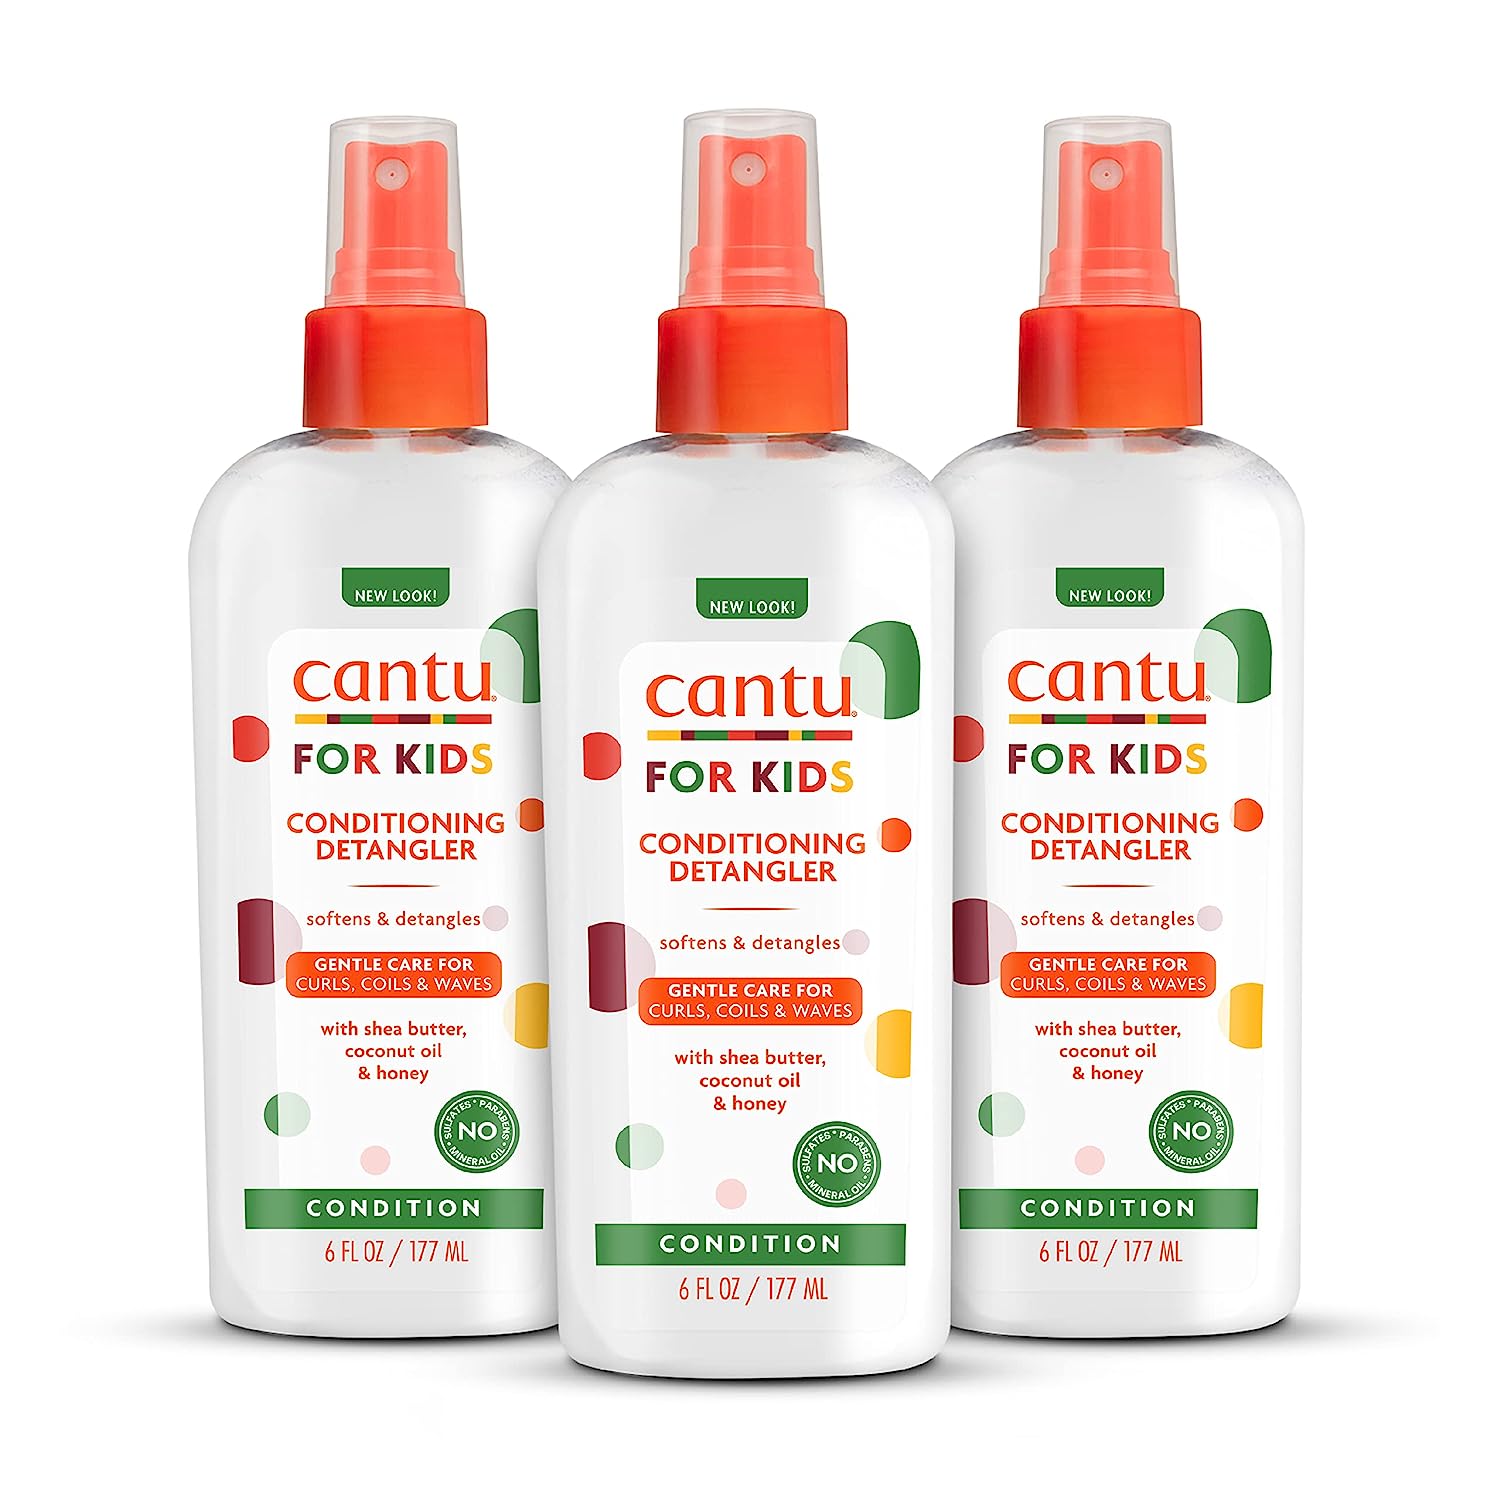 Cantu Care for Kids Paraben & Sulfate-Free [...]